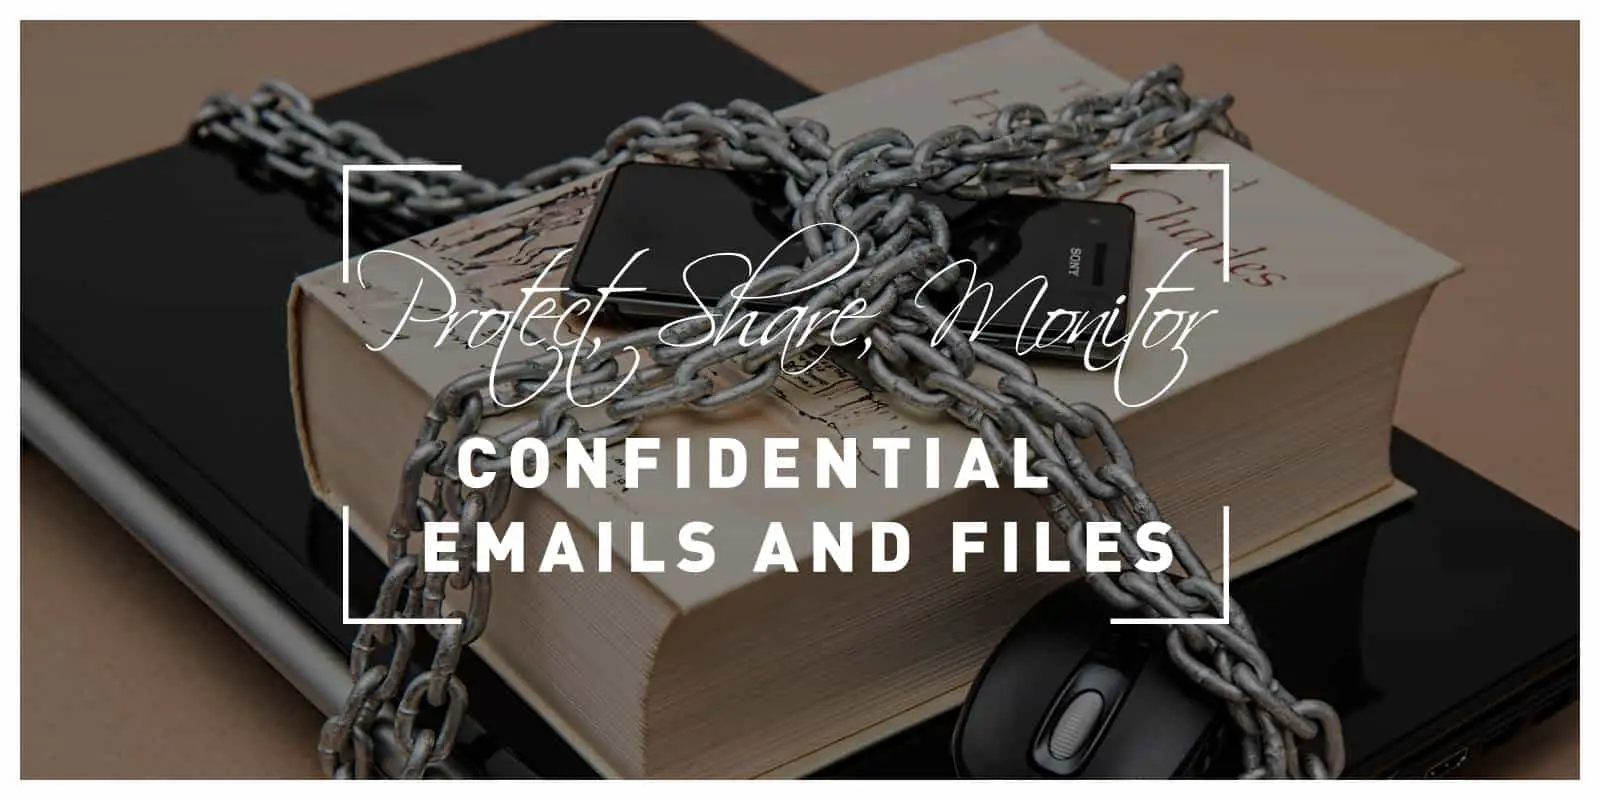 Protect, Share and Monitor Confidential Emails and Files